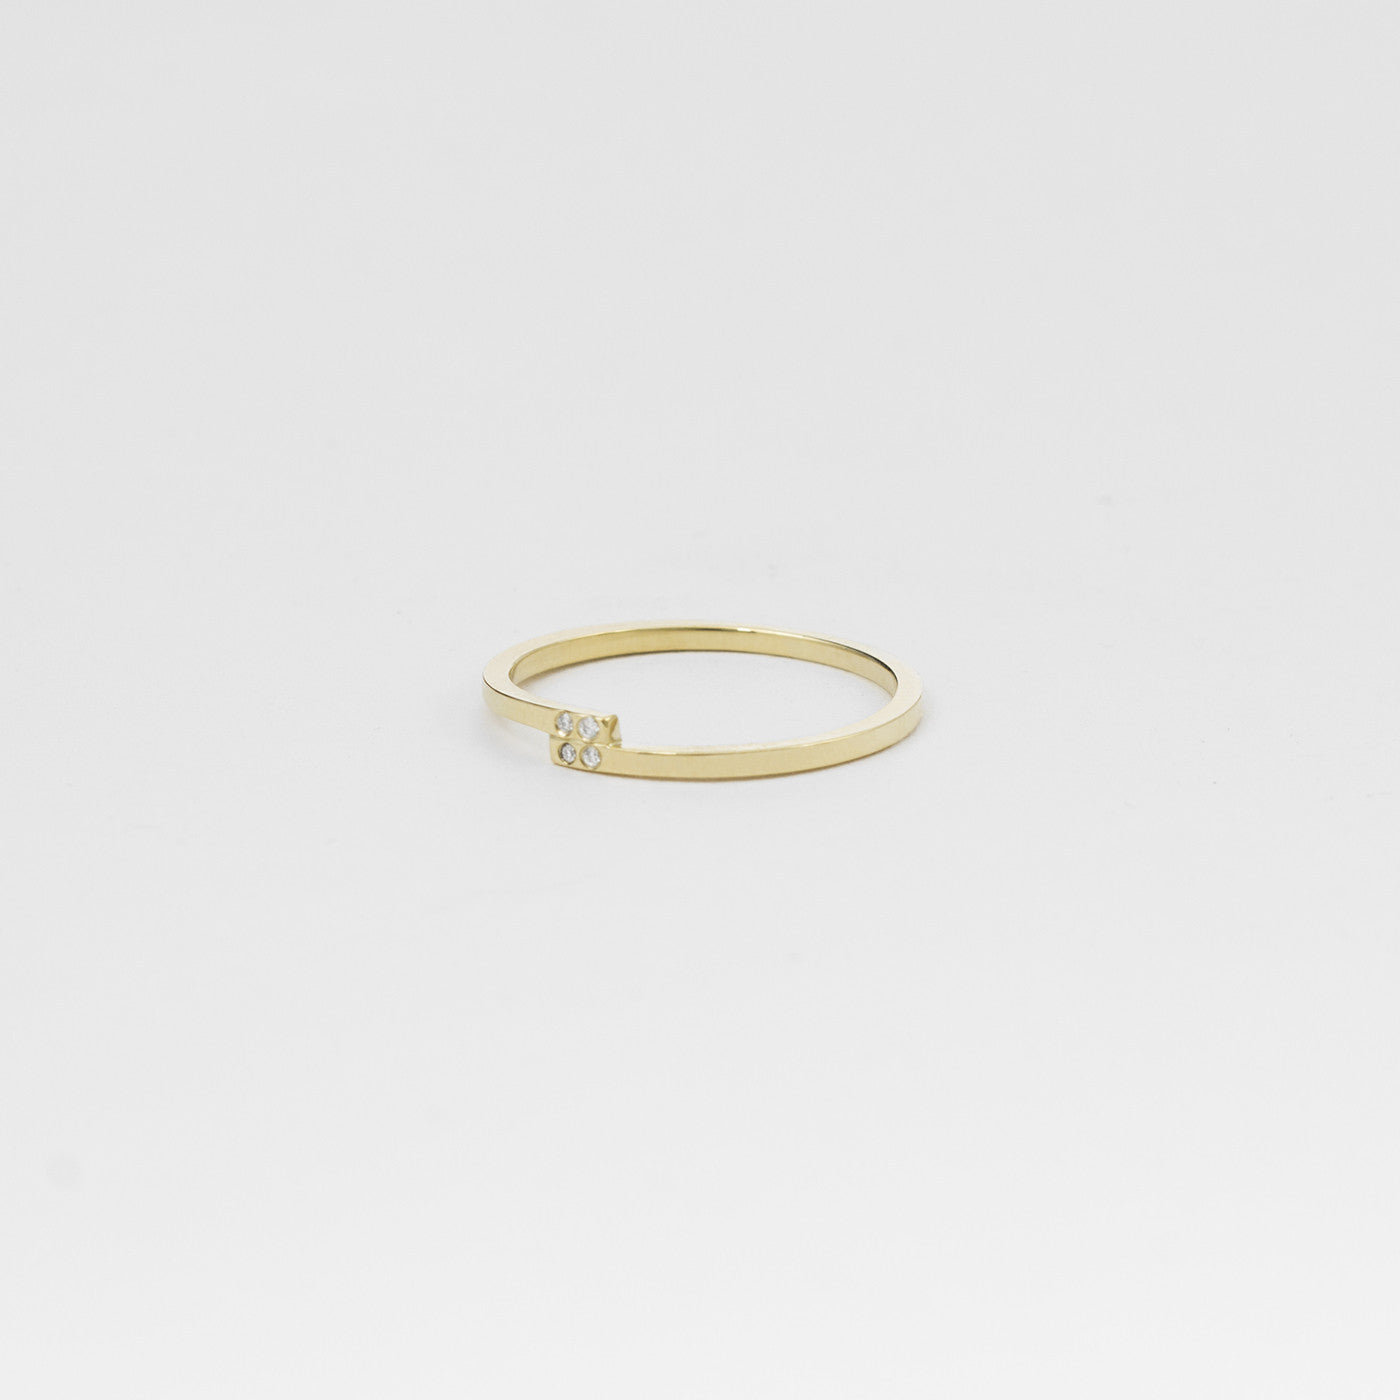 Piva Designer Ring in 14k Gold set with White Diamonds By SHW Fine Jewelry NYC